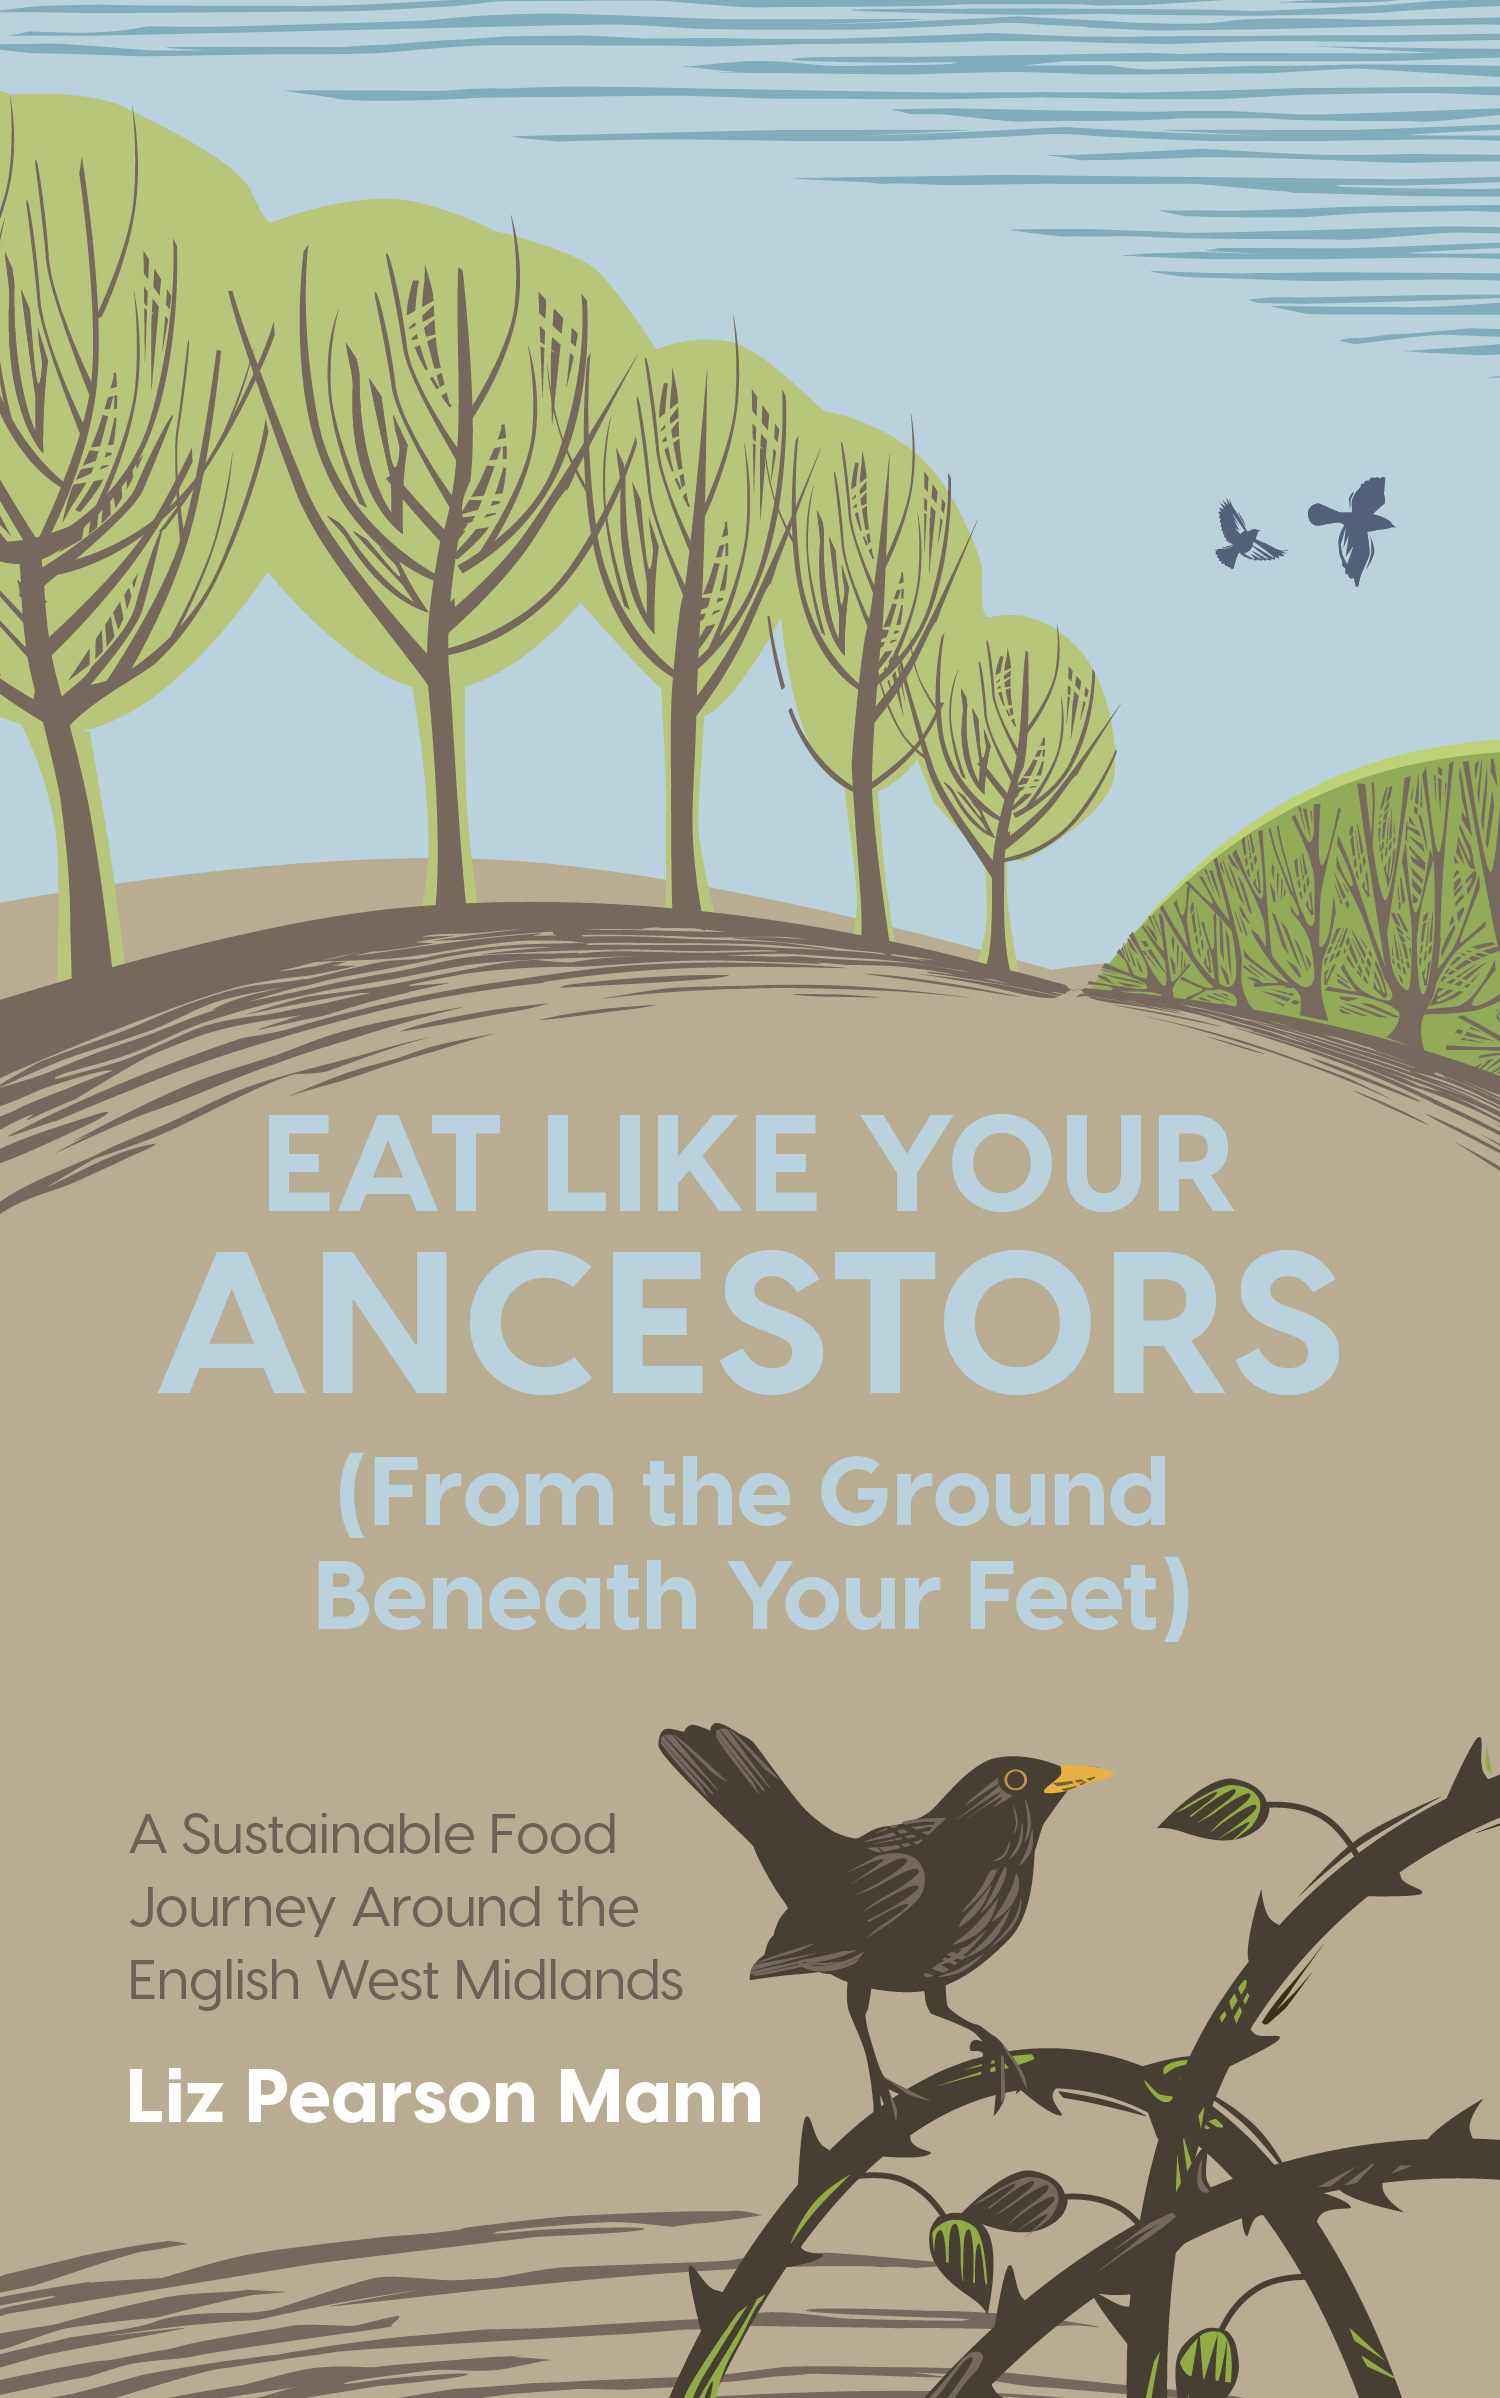 Eat Like Your Ancestors (From the ground Beneath Your Feet): A Sustainable Food Journey Around the English West Midlands